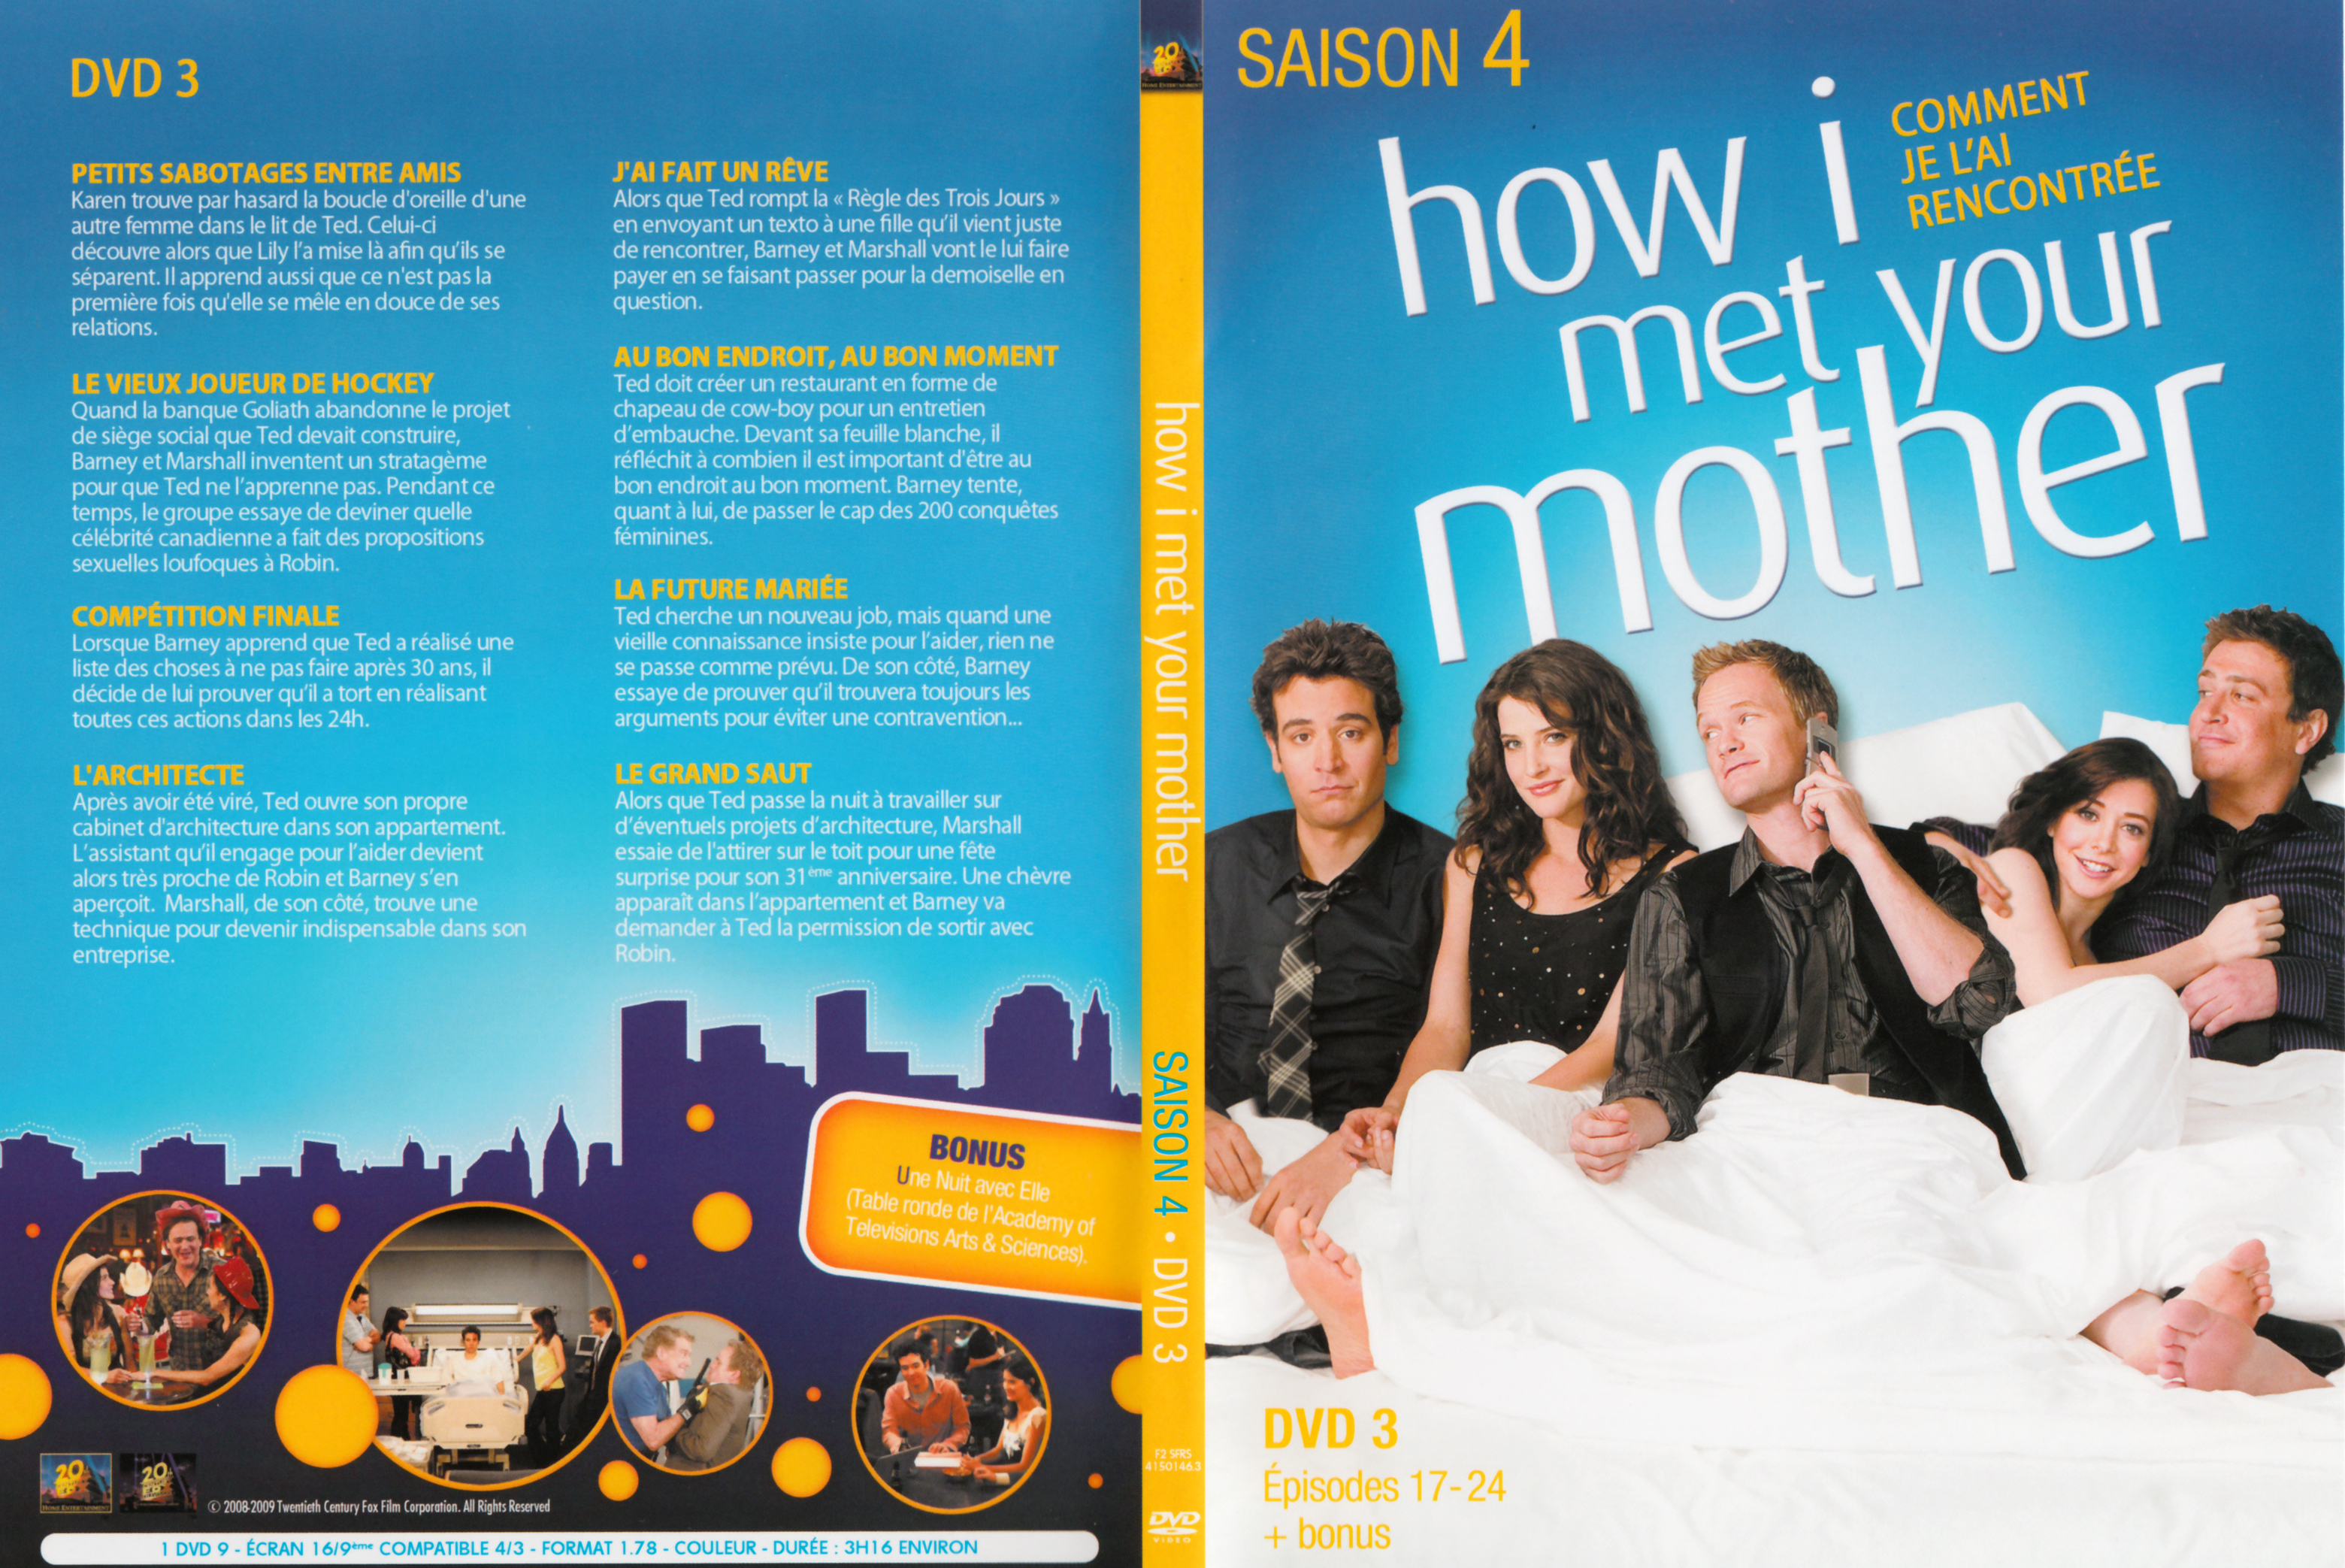 Jaquette DVD How i met your mother Saison 4 DVD 3